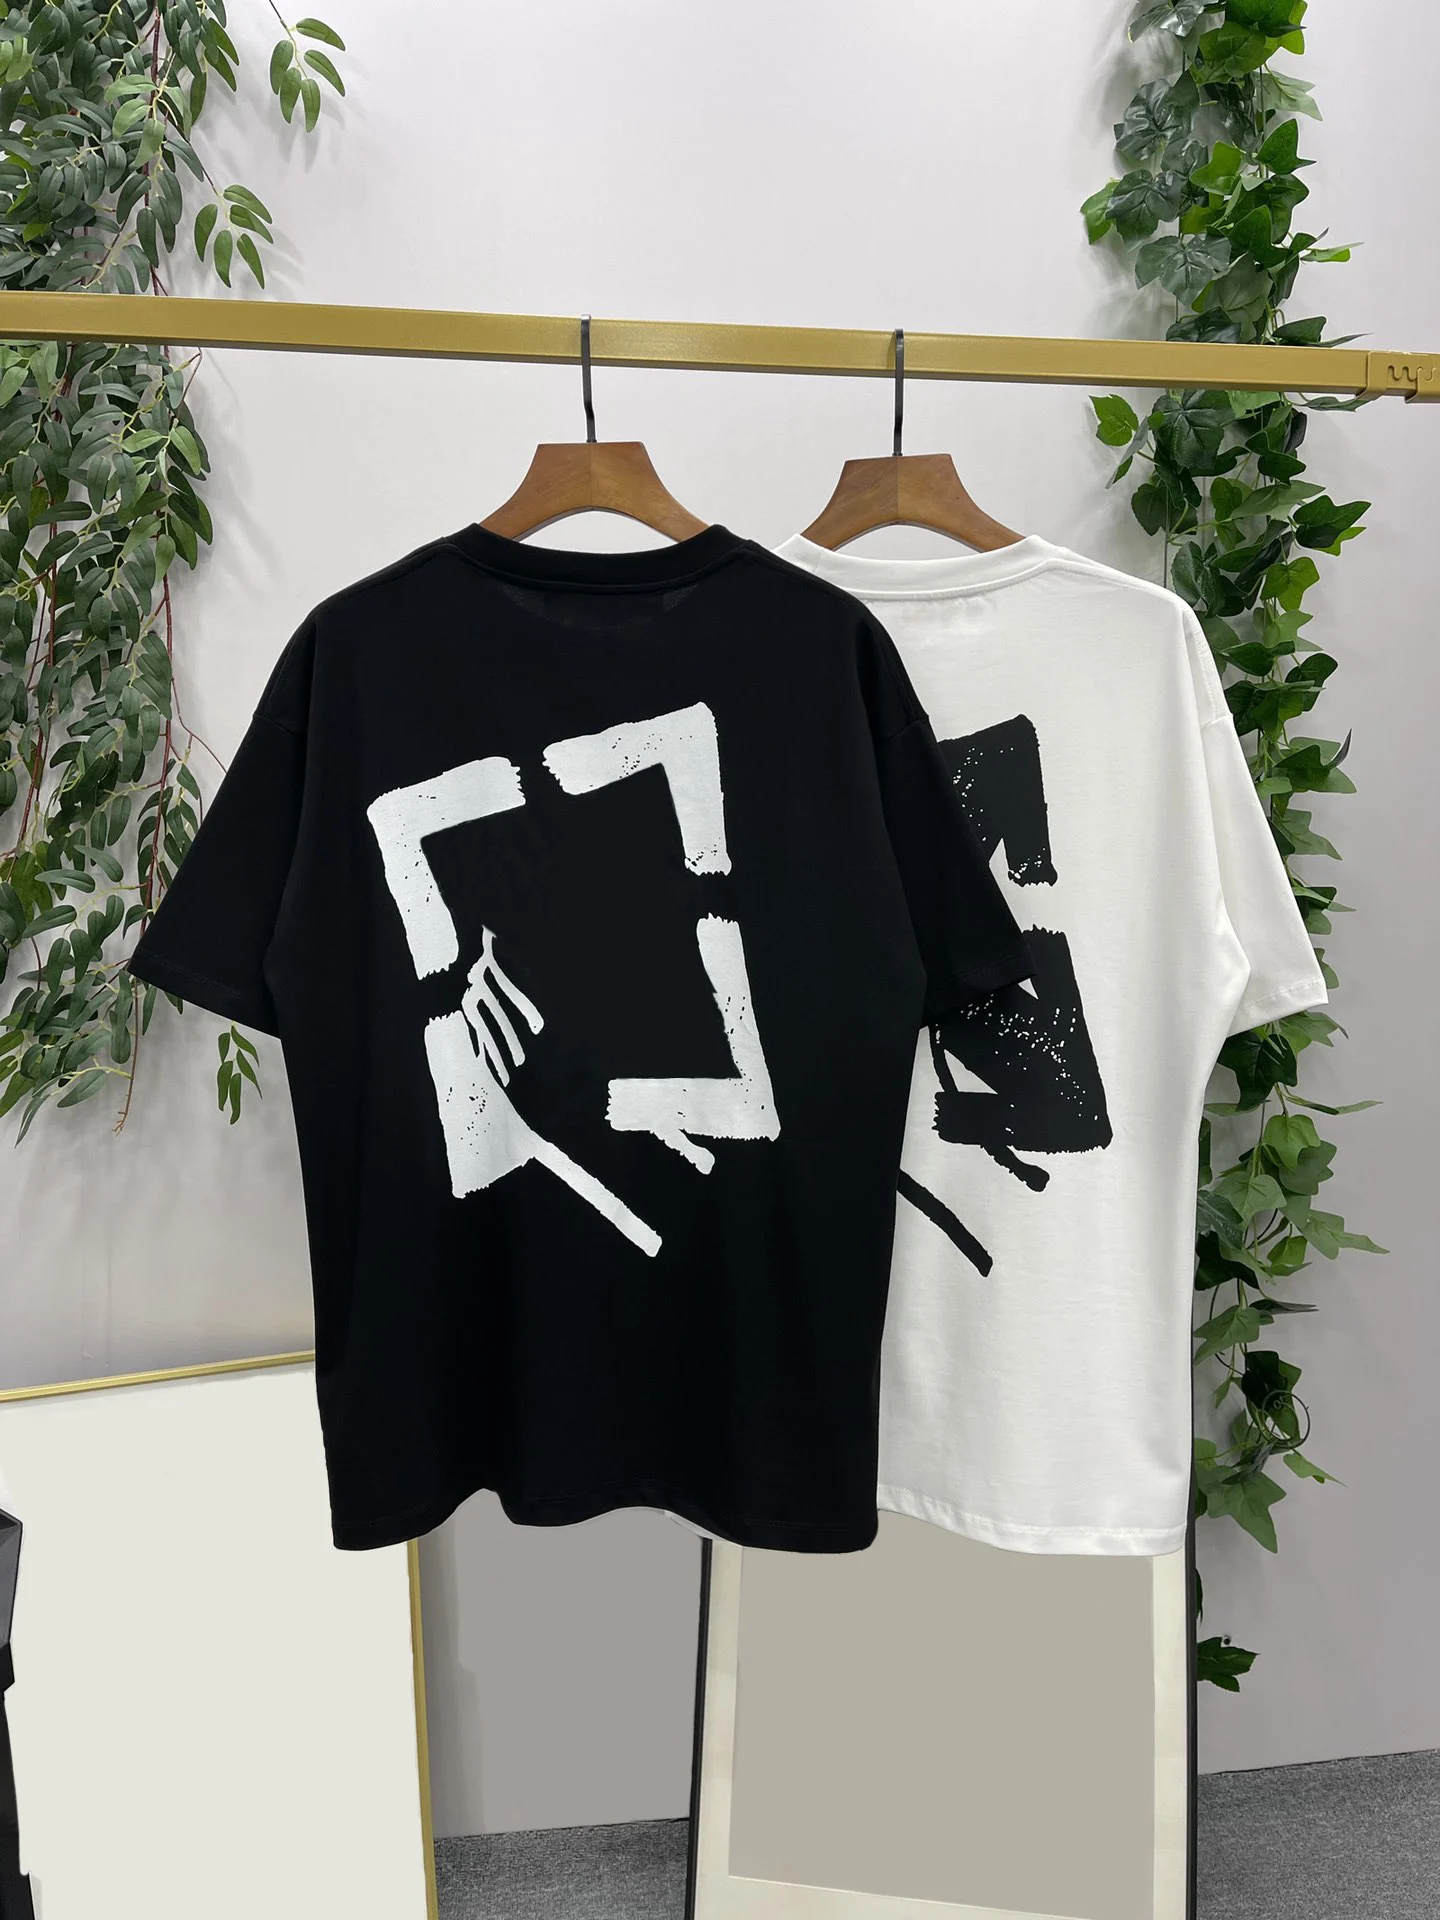 

2023 Summer ★New Arrival★ O-Neck Men’s Fashion Casual T-Shirt | Holding Arrow | Streetwear | Limited Time Offer